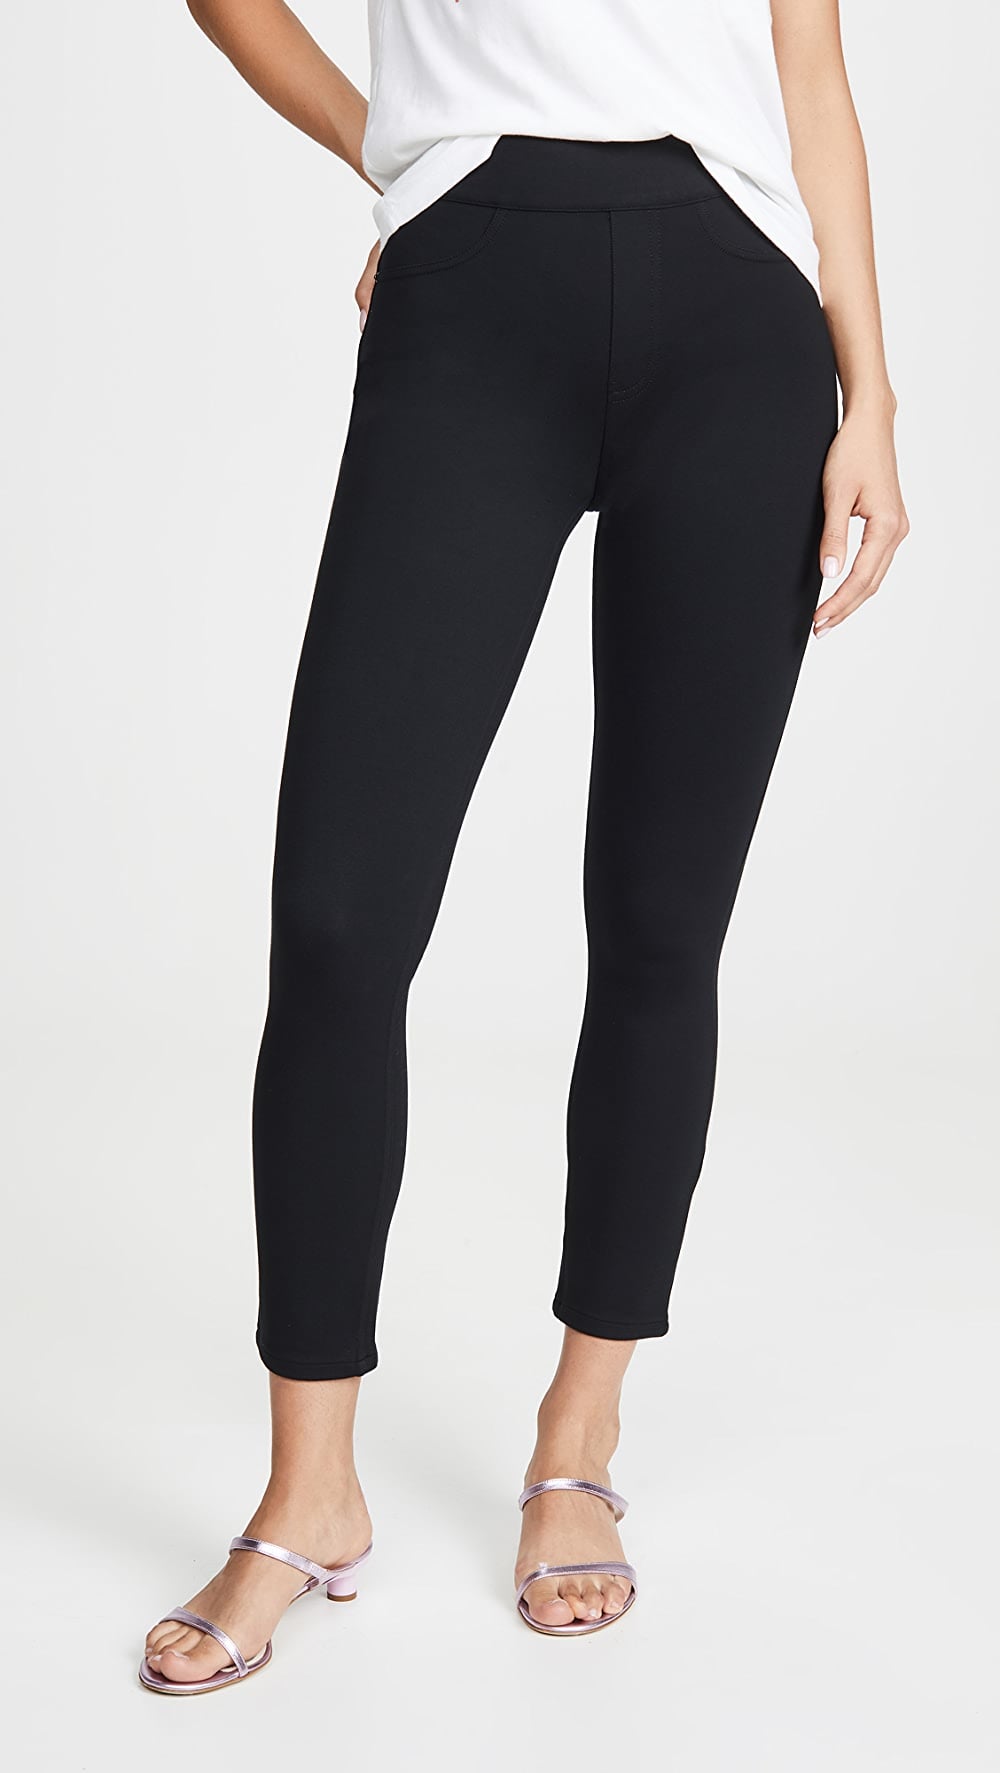 Spanx Ponte Leggings, These 15 Leggings Will Make You Look and Feel  Put-Together